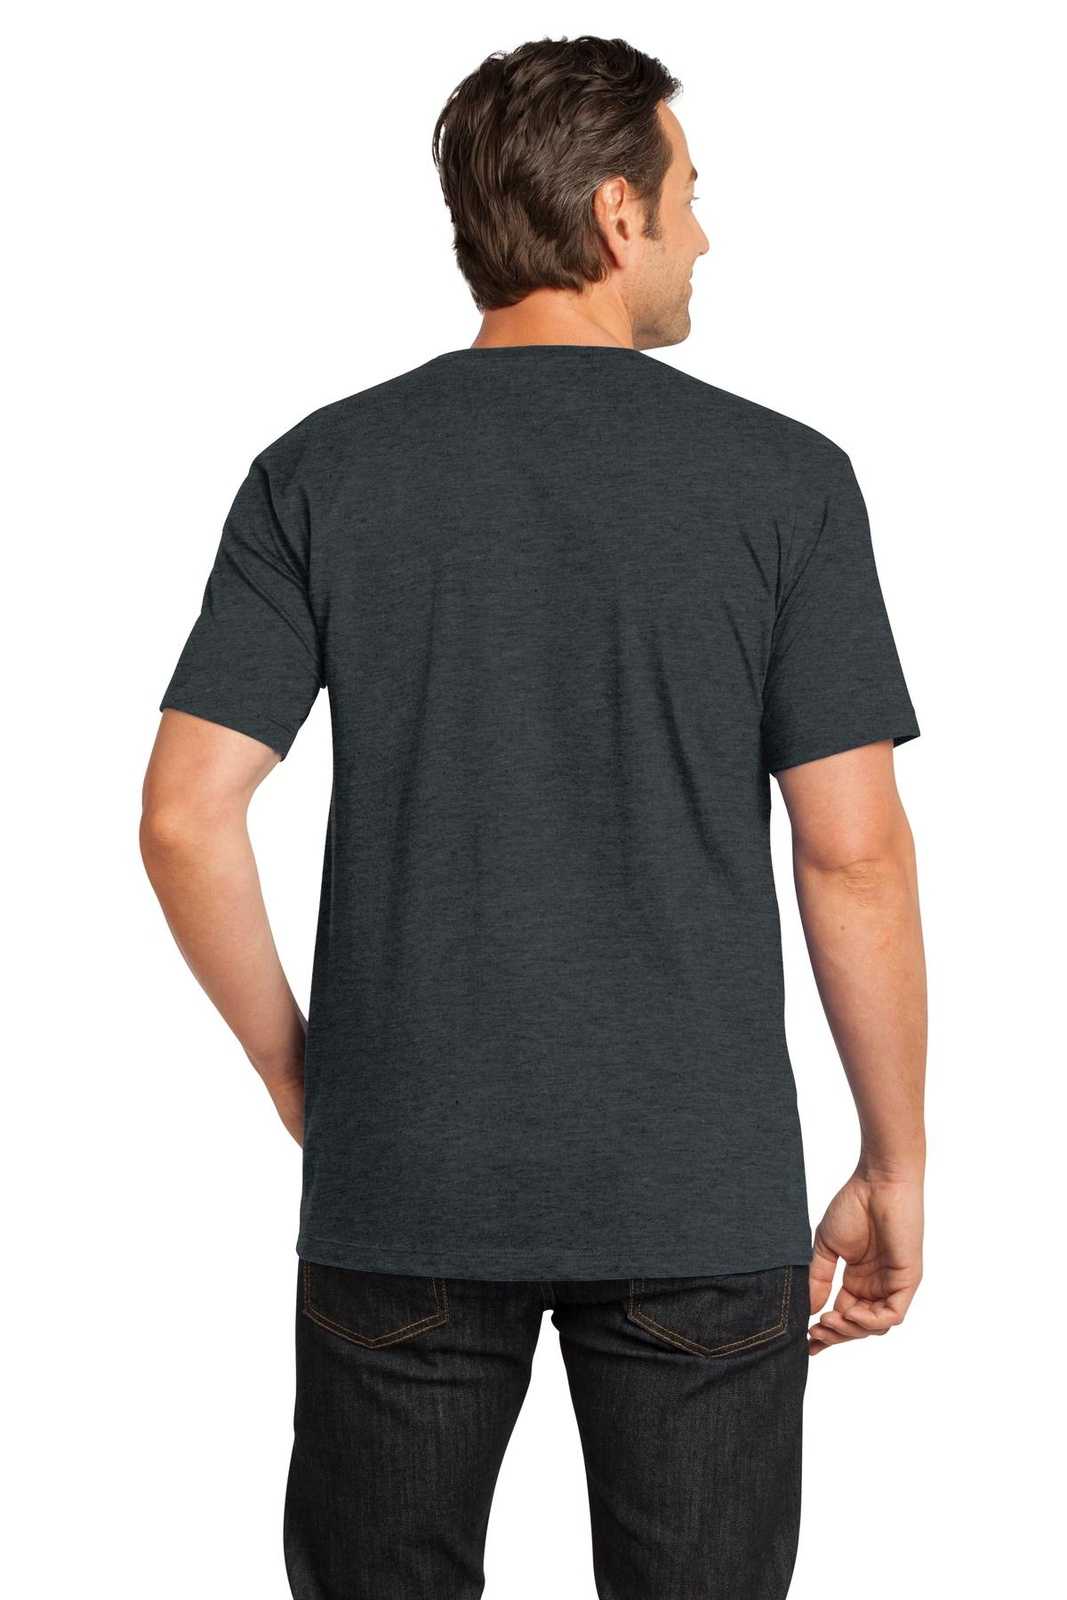 District DT104 Perfect Weight Tee - Heathered Charcoal - HIT a Double - 1